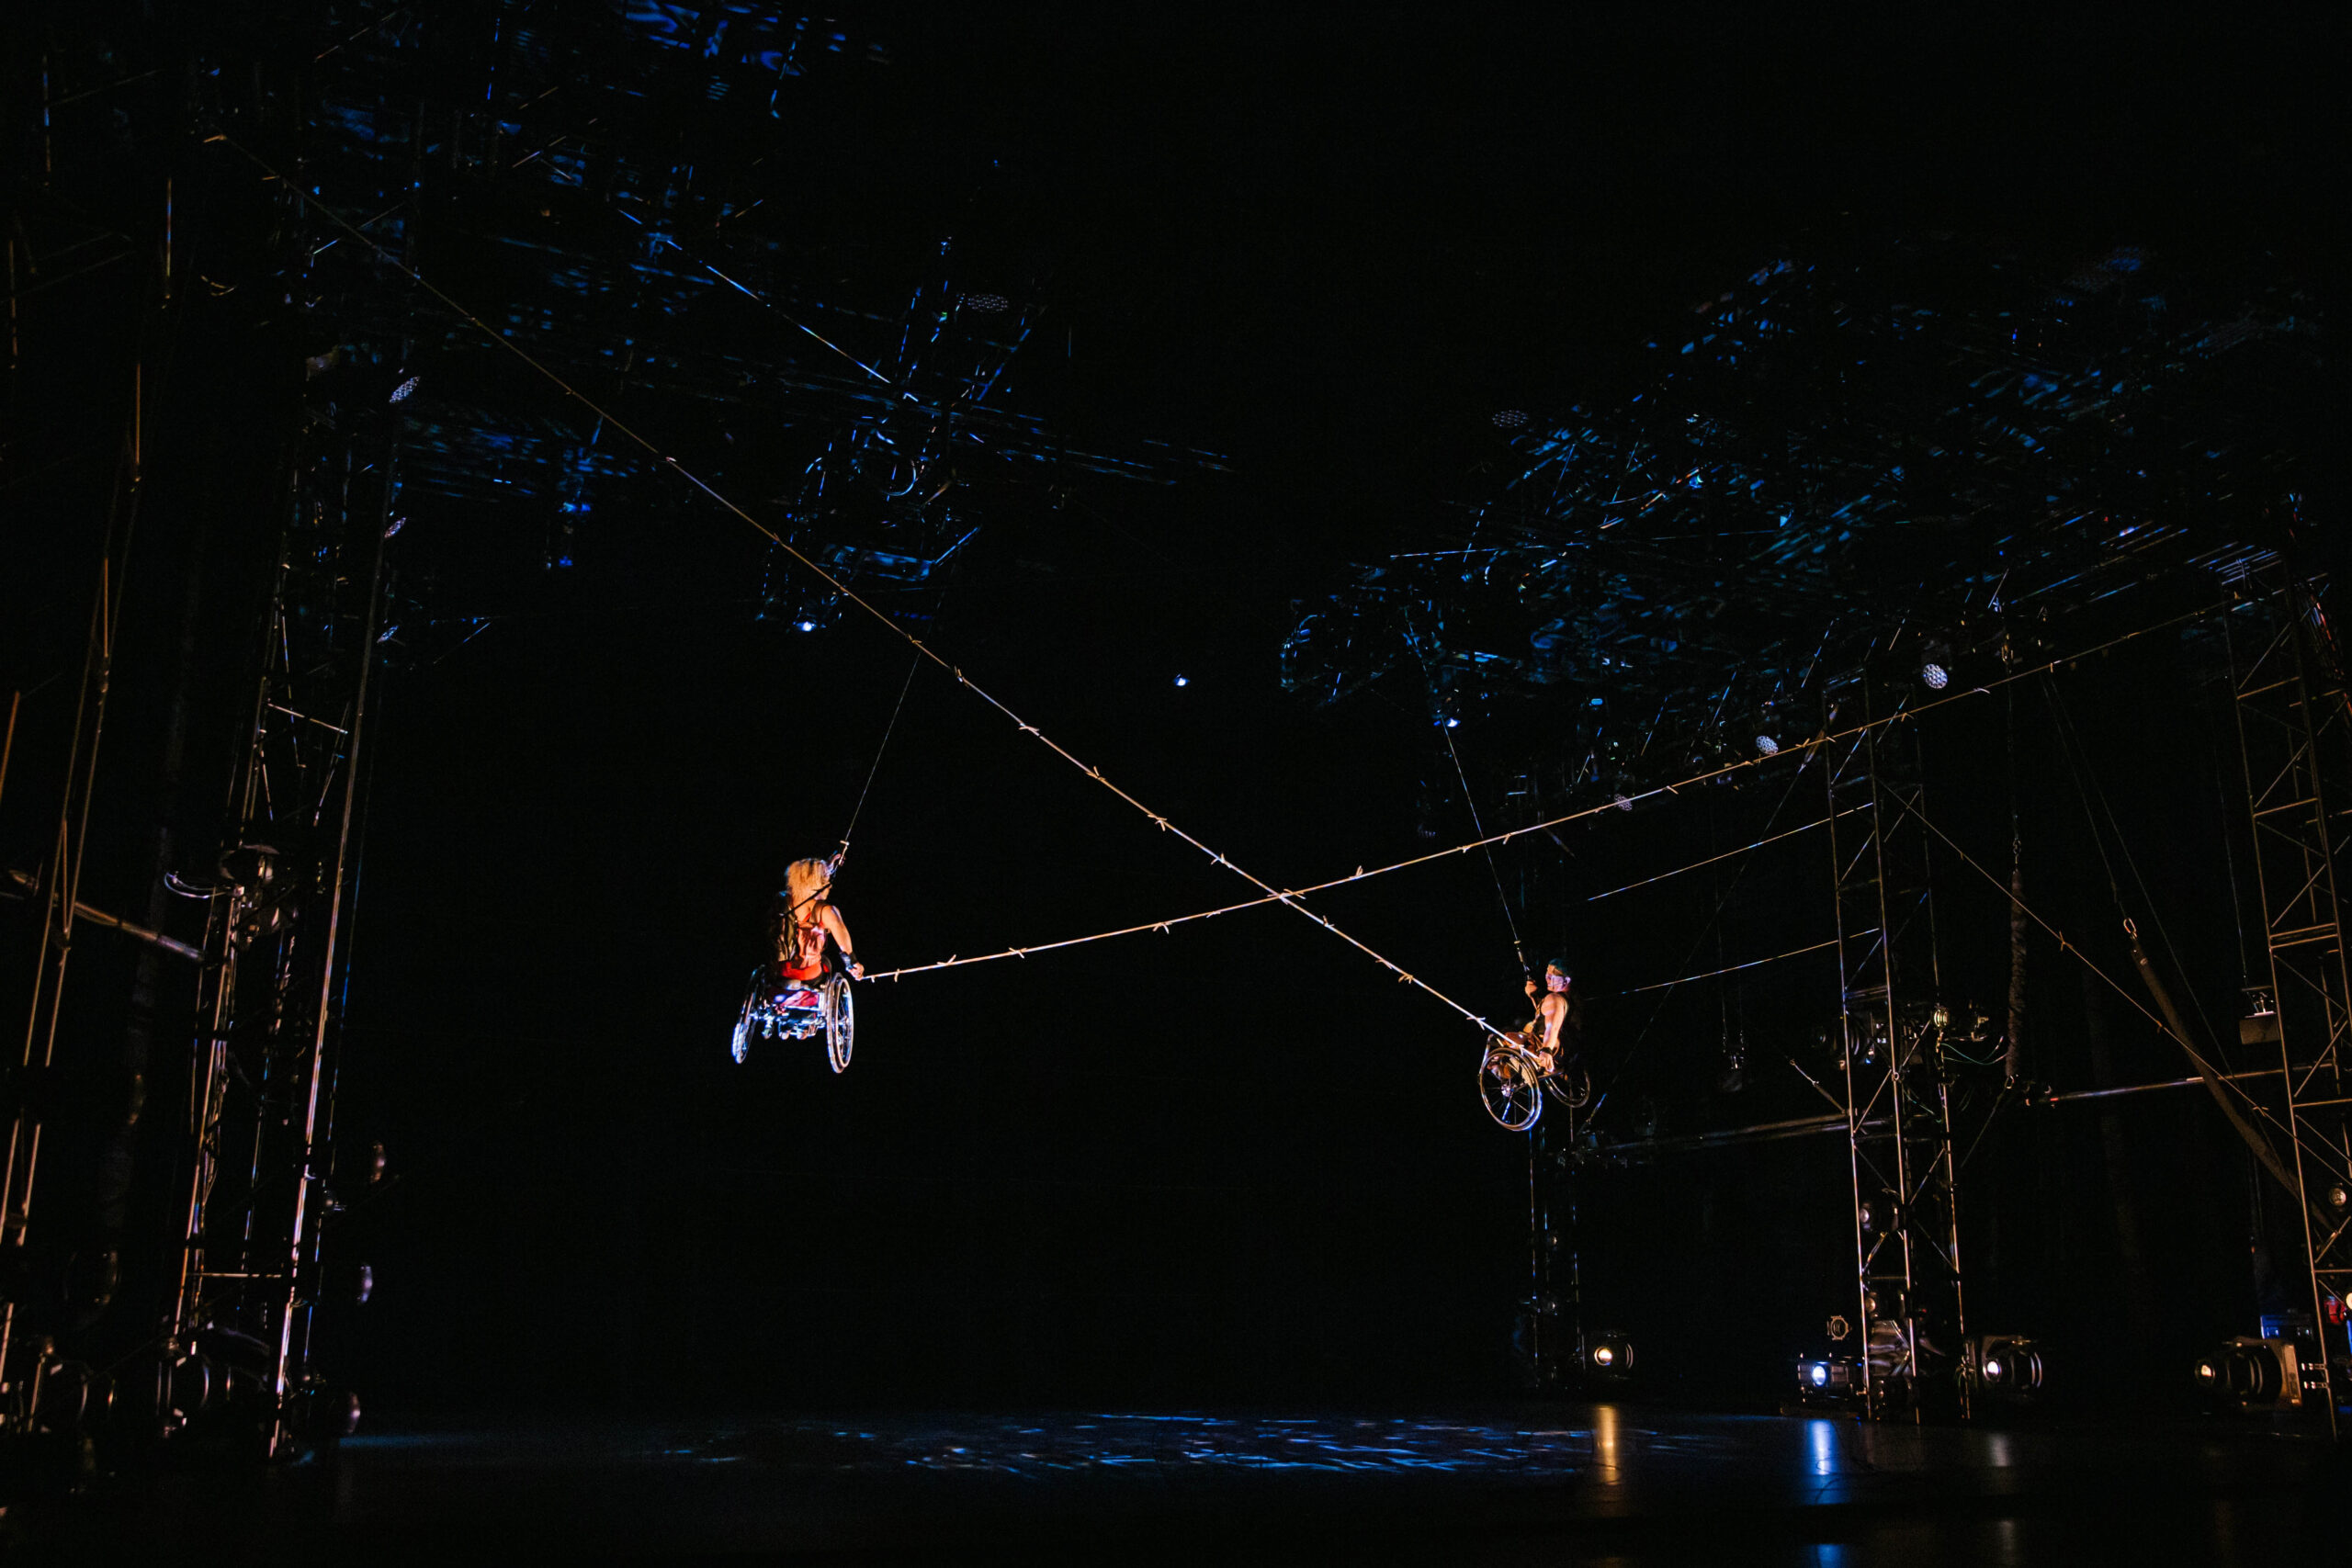 Alice Sheppard and Laurel Lawson fly through the air. They look small amidst the large, dark performance space. Barbed wire extends and crosses between them, creating a big X, as their chairs and the tall metal truss that surrounds them shine in the theatrical light. The expansive ceiling above them is spackled in blue projection.